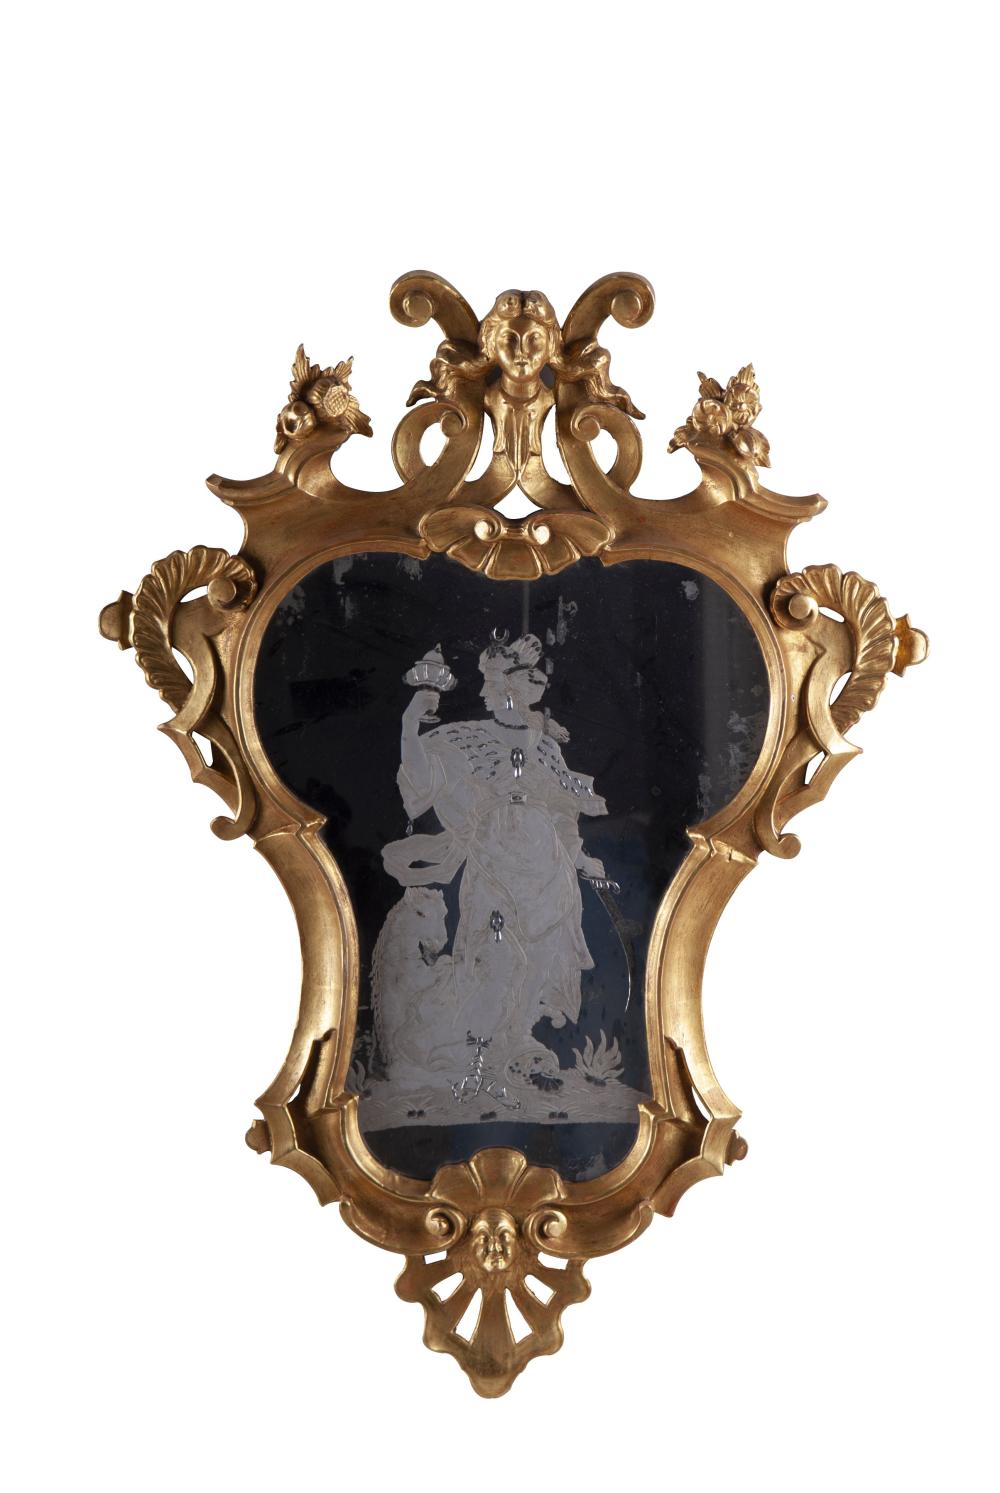 BAROQUE STYLE GILT ETCHED MIRRORthe 335c6f